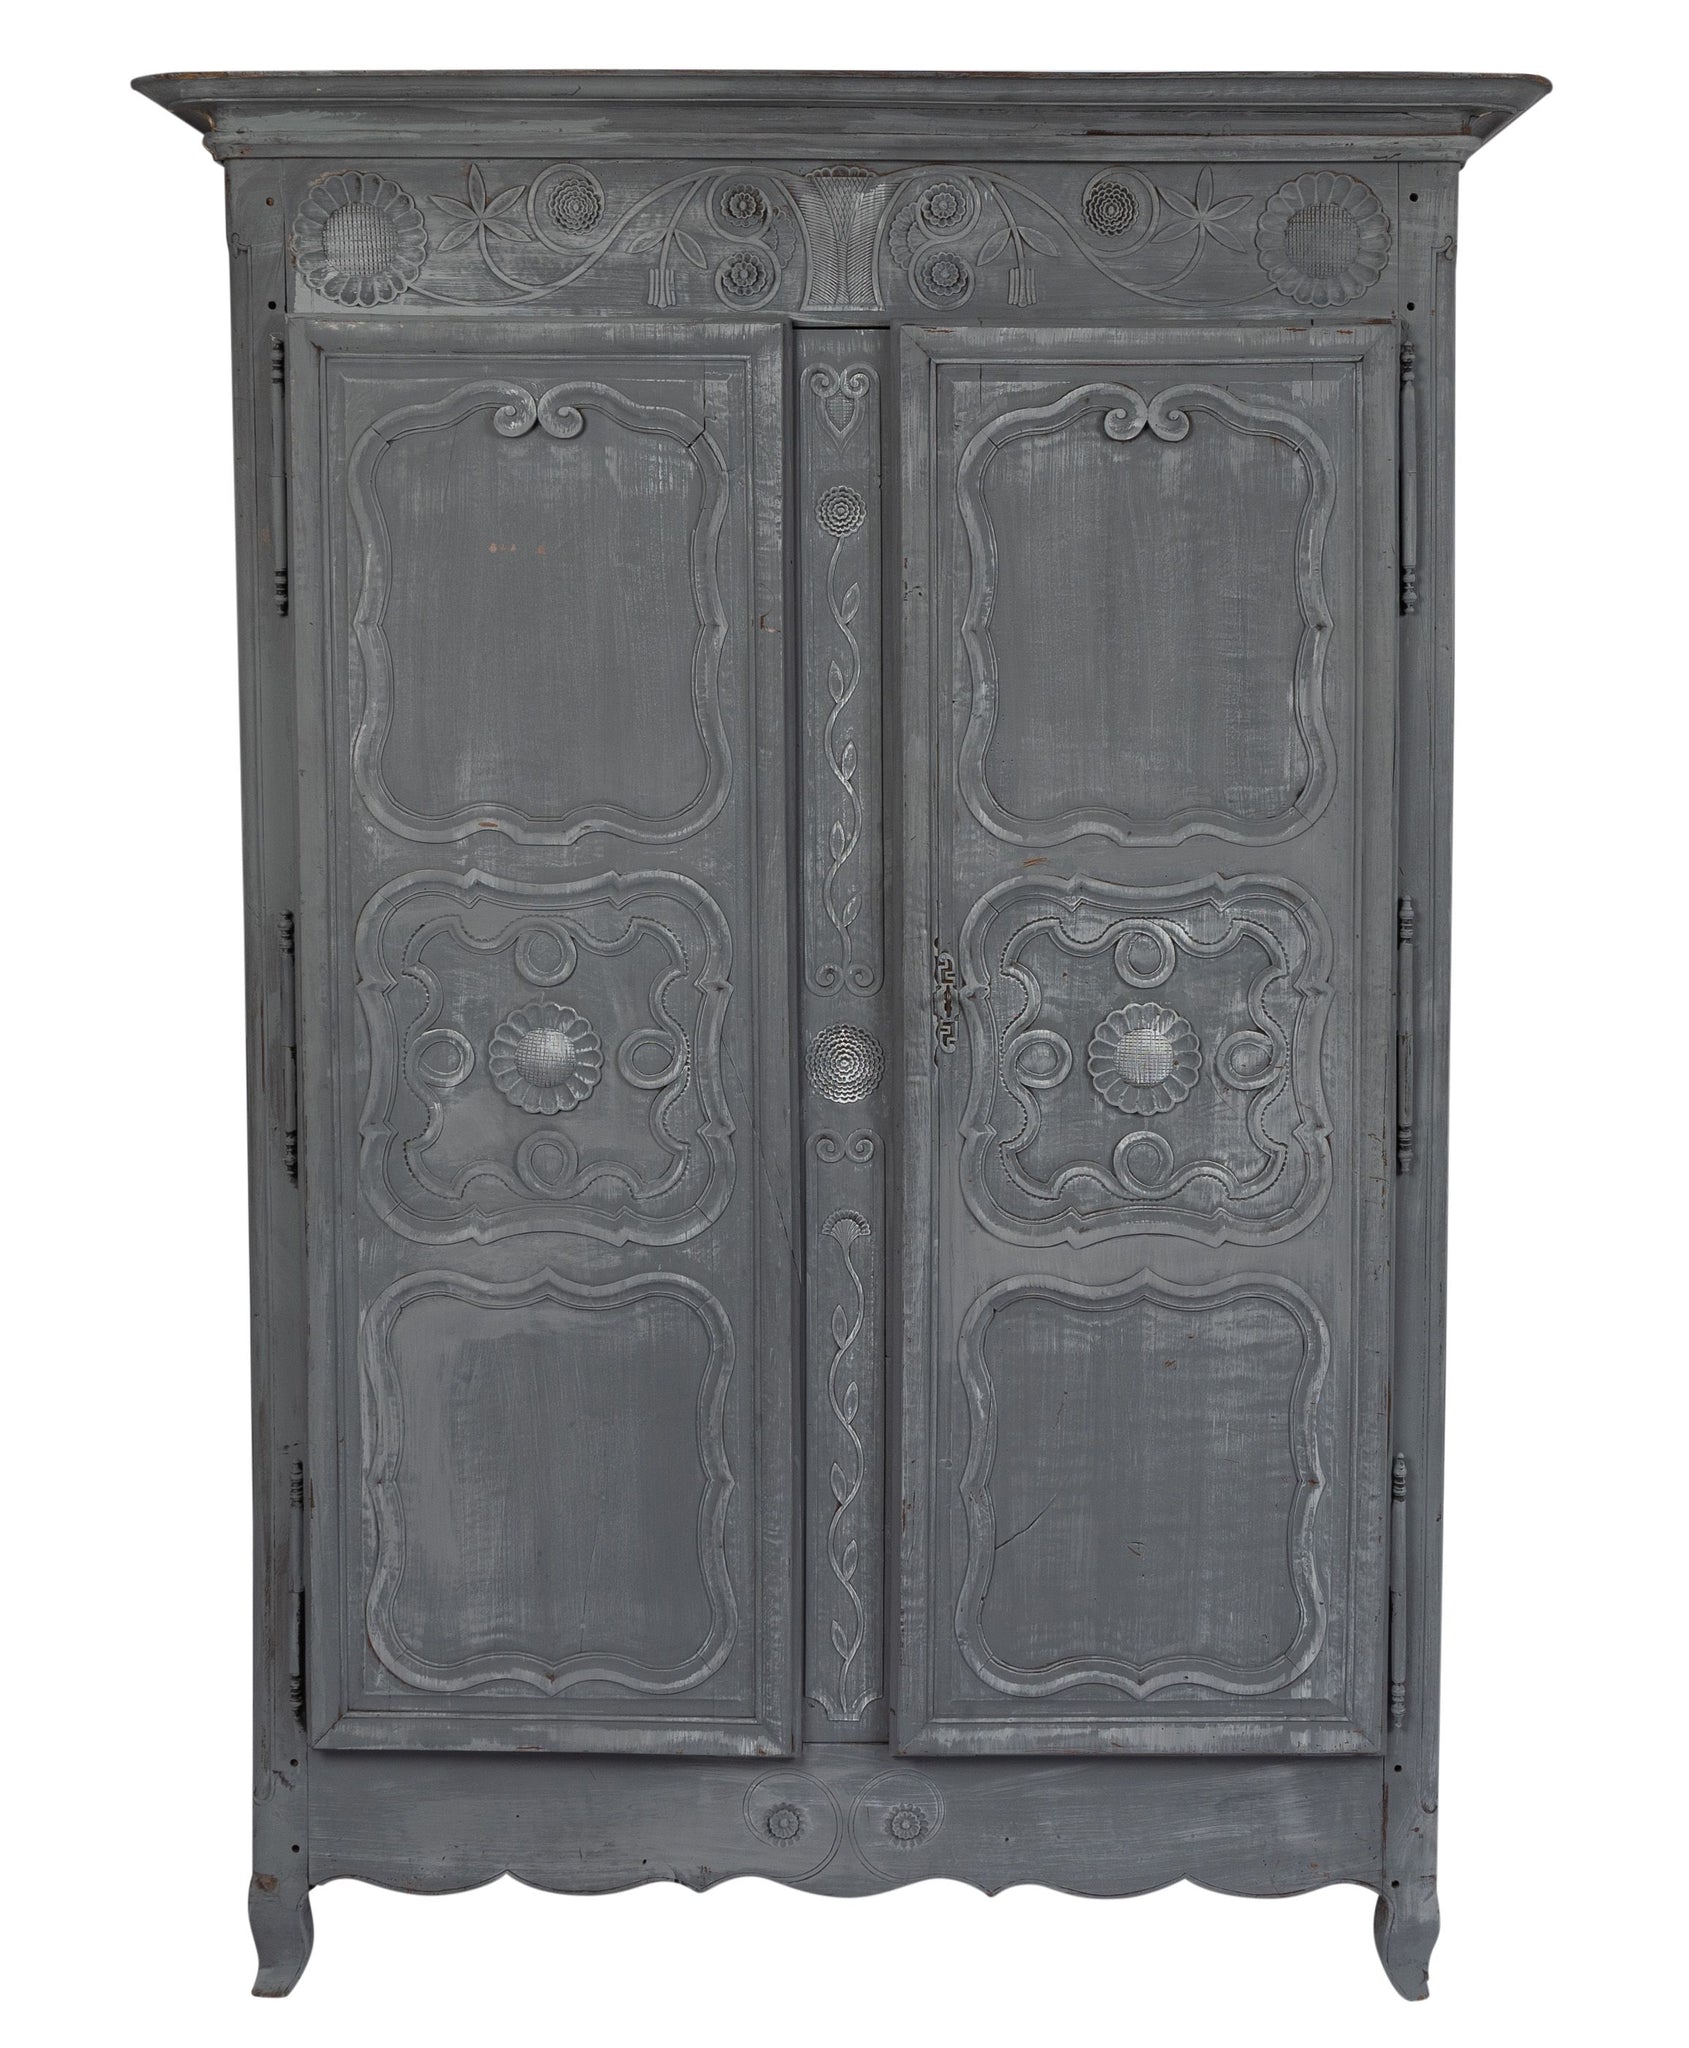 Antique French grey painted "sunflower" armoire from the French Alps